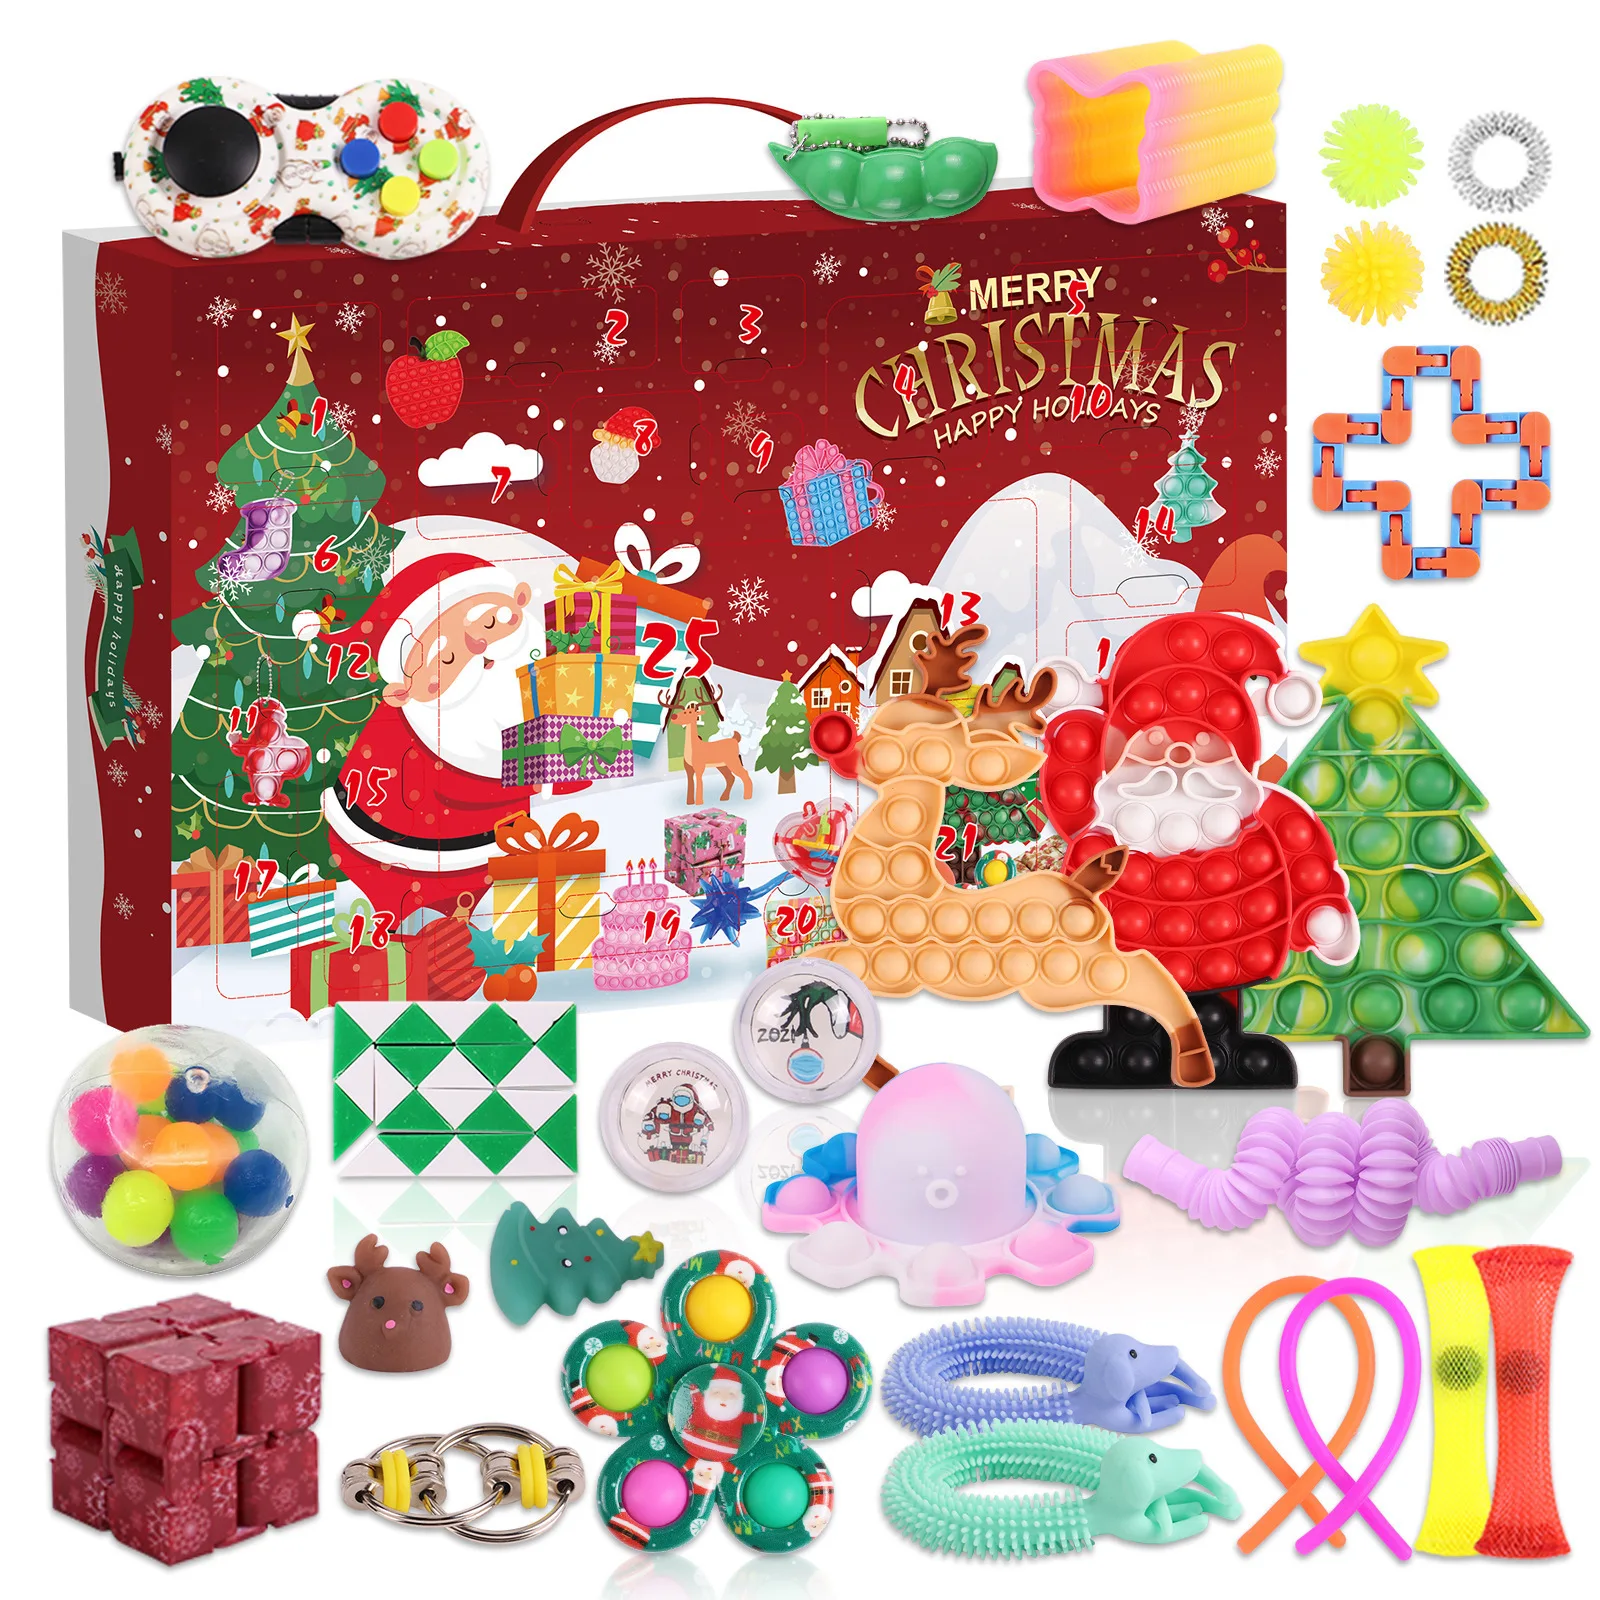 

Christmas Advent Calendars 24 Days Fidget Toys Lucky Mystery Blind Box Xmas Gifts Novelty Surprise For Kids Party Favors Goodies